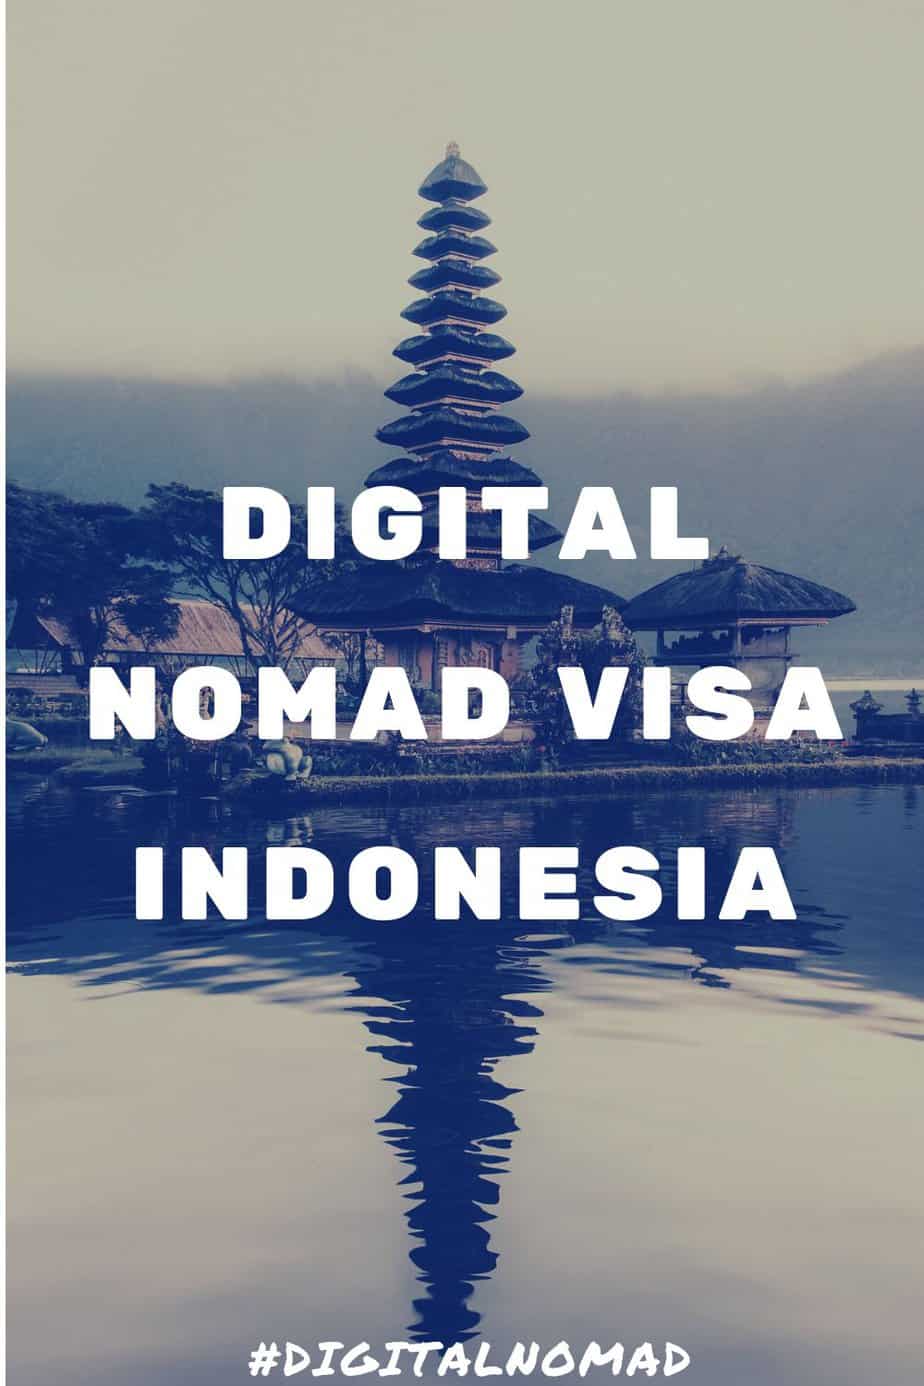 Indonesia digital nomad visa – Is there one?